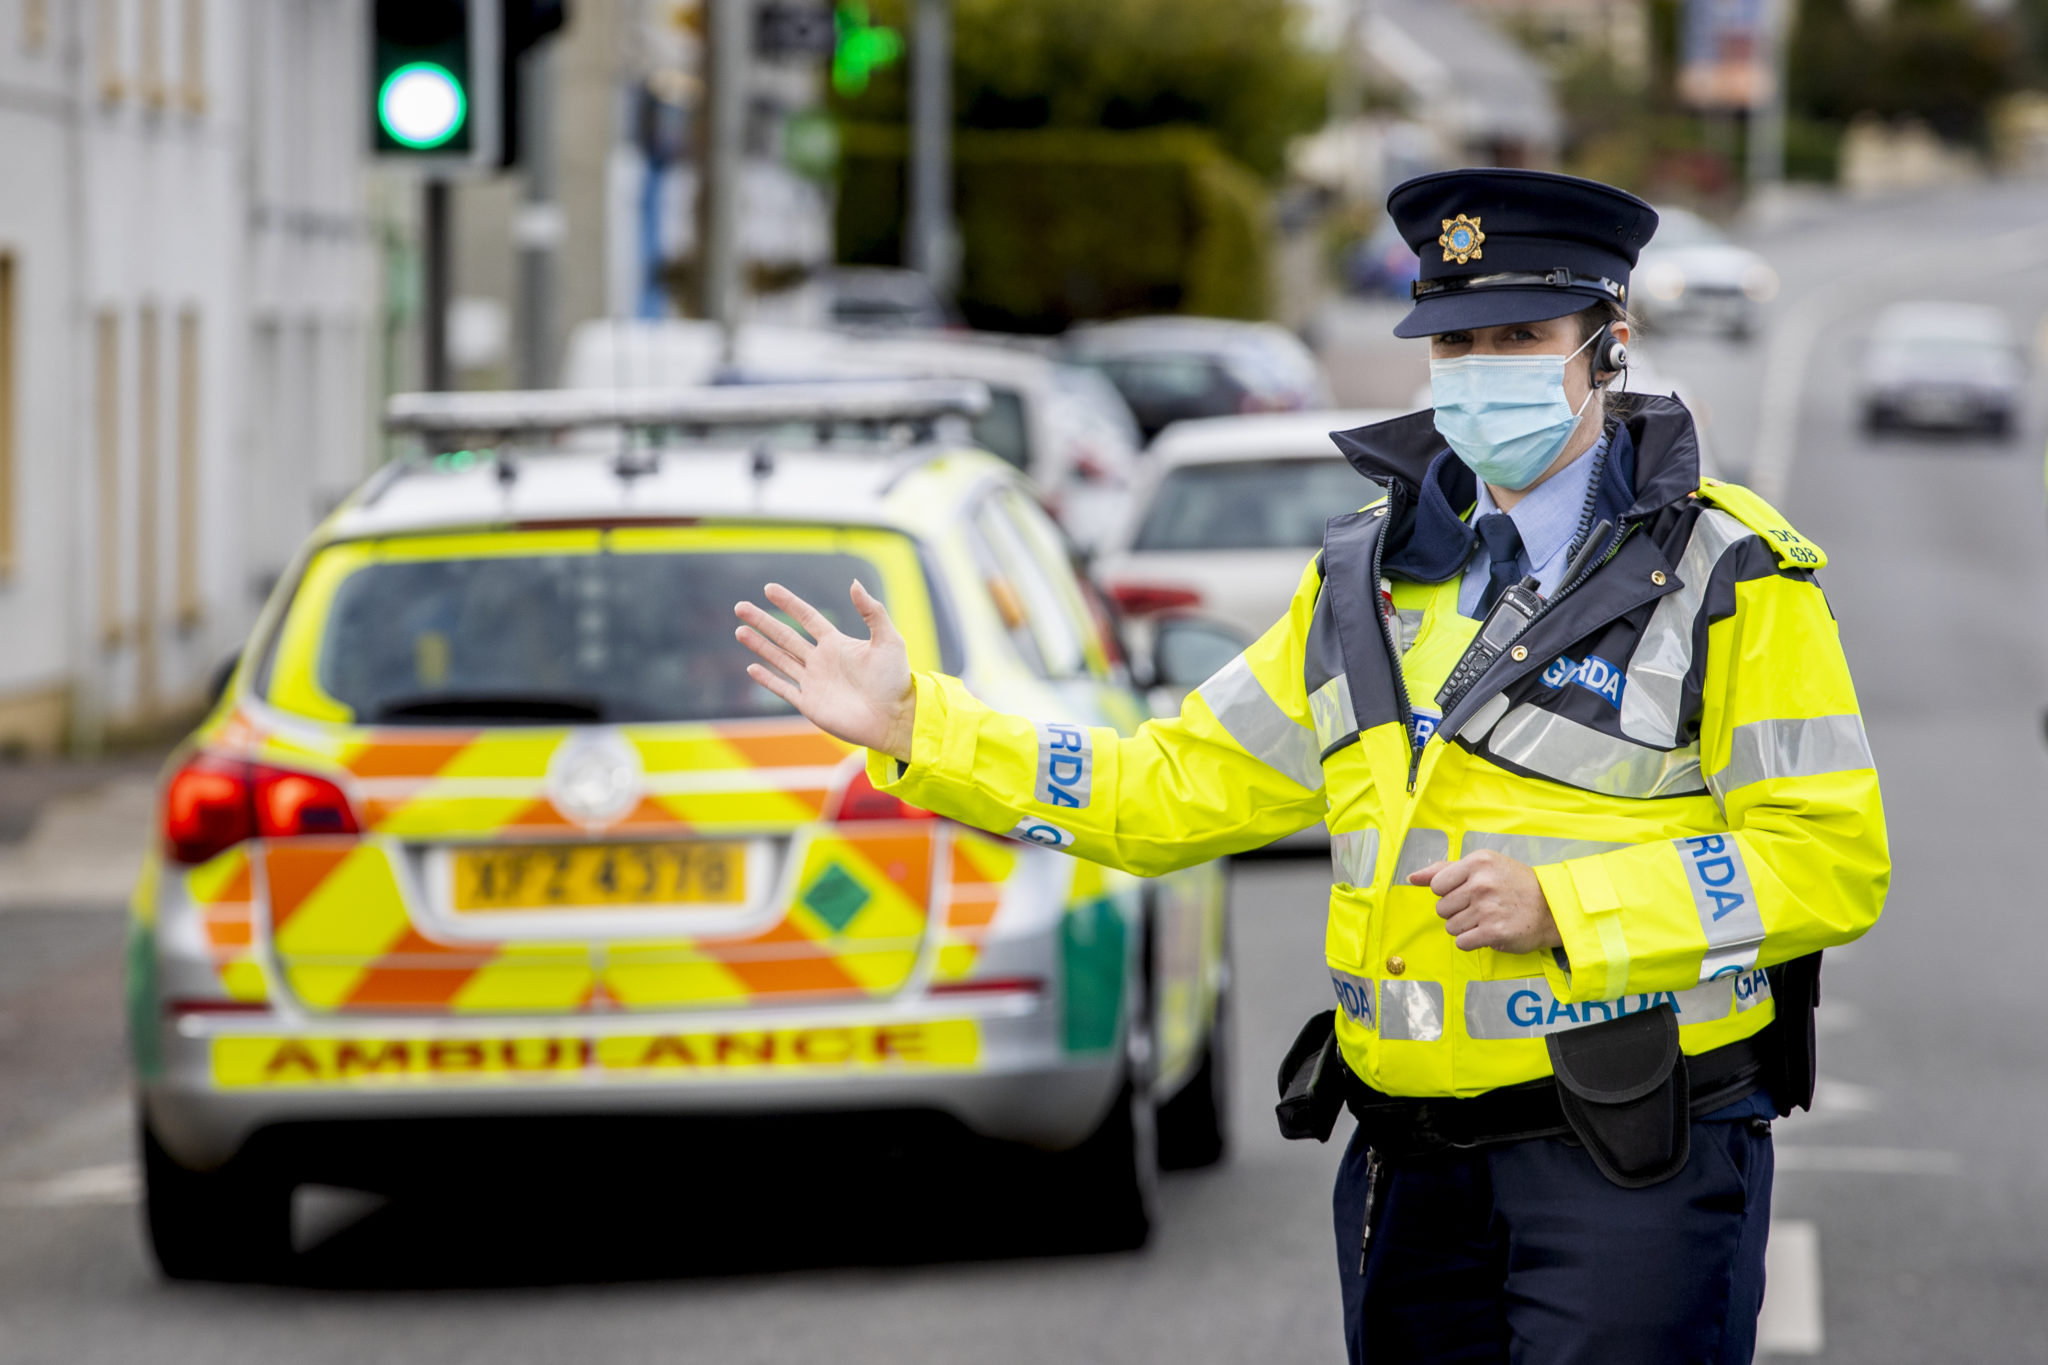 Gardaí performing random vehicle checks in the border village of Muff, County Donegal